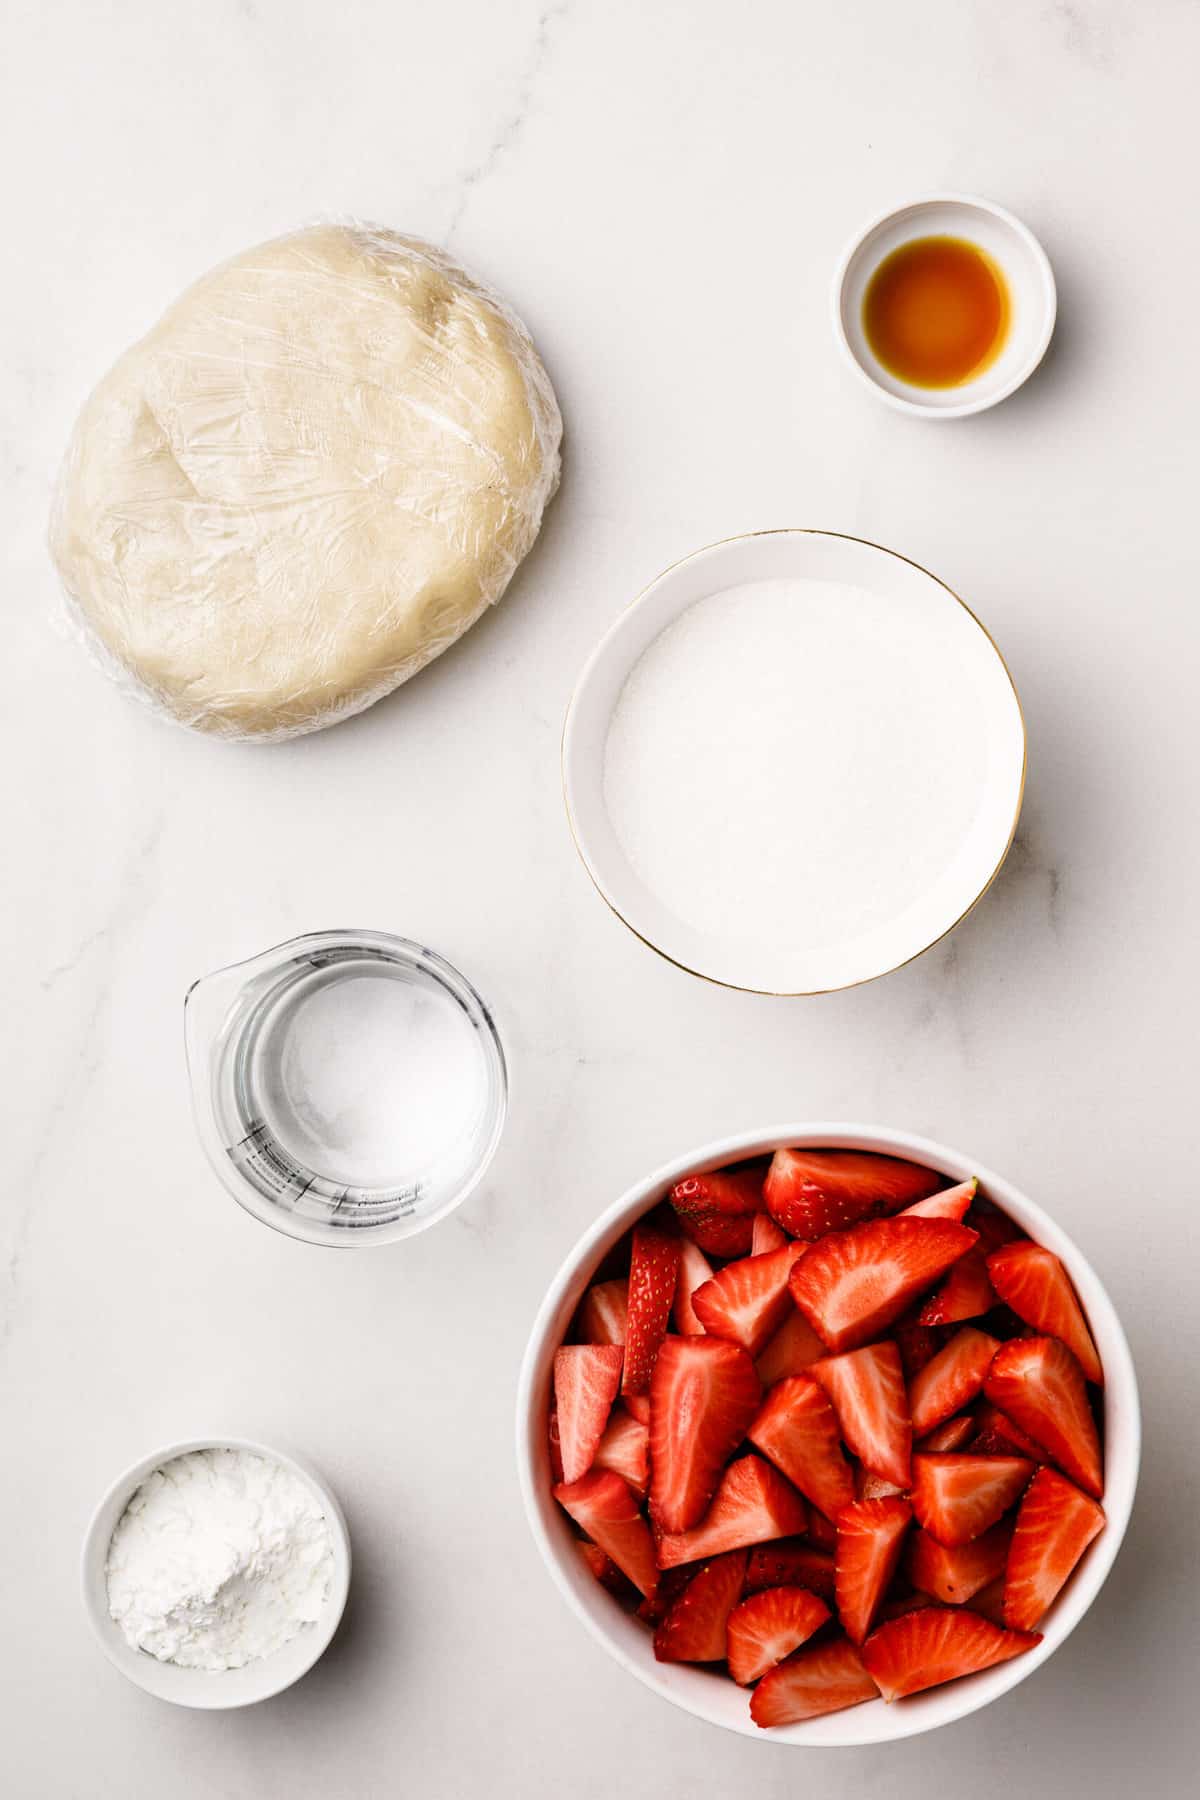 ingredients to make strawberry pie with chantilly cream